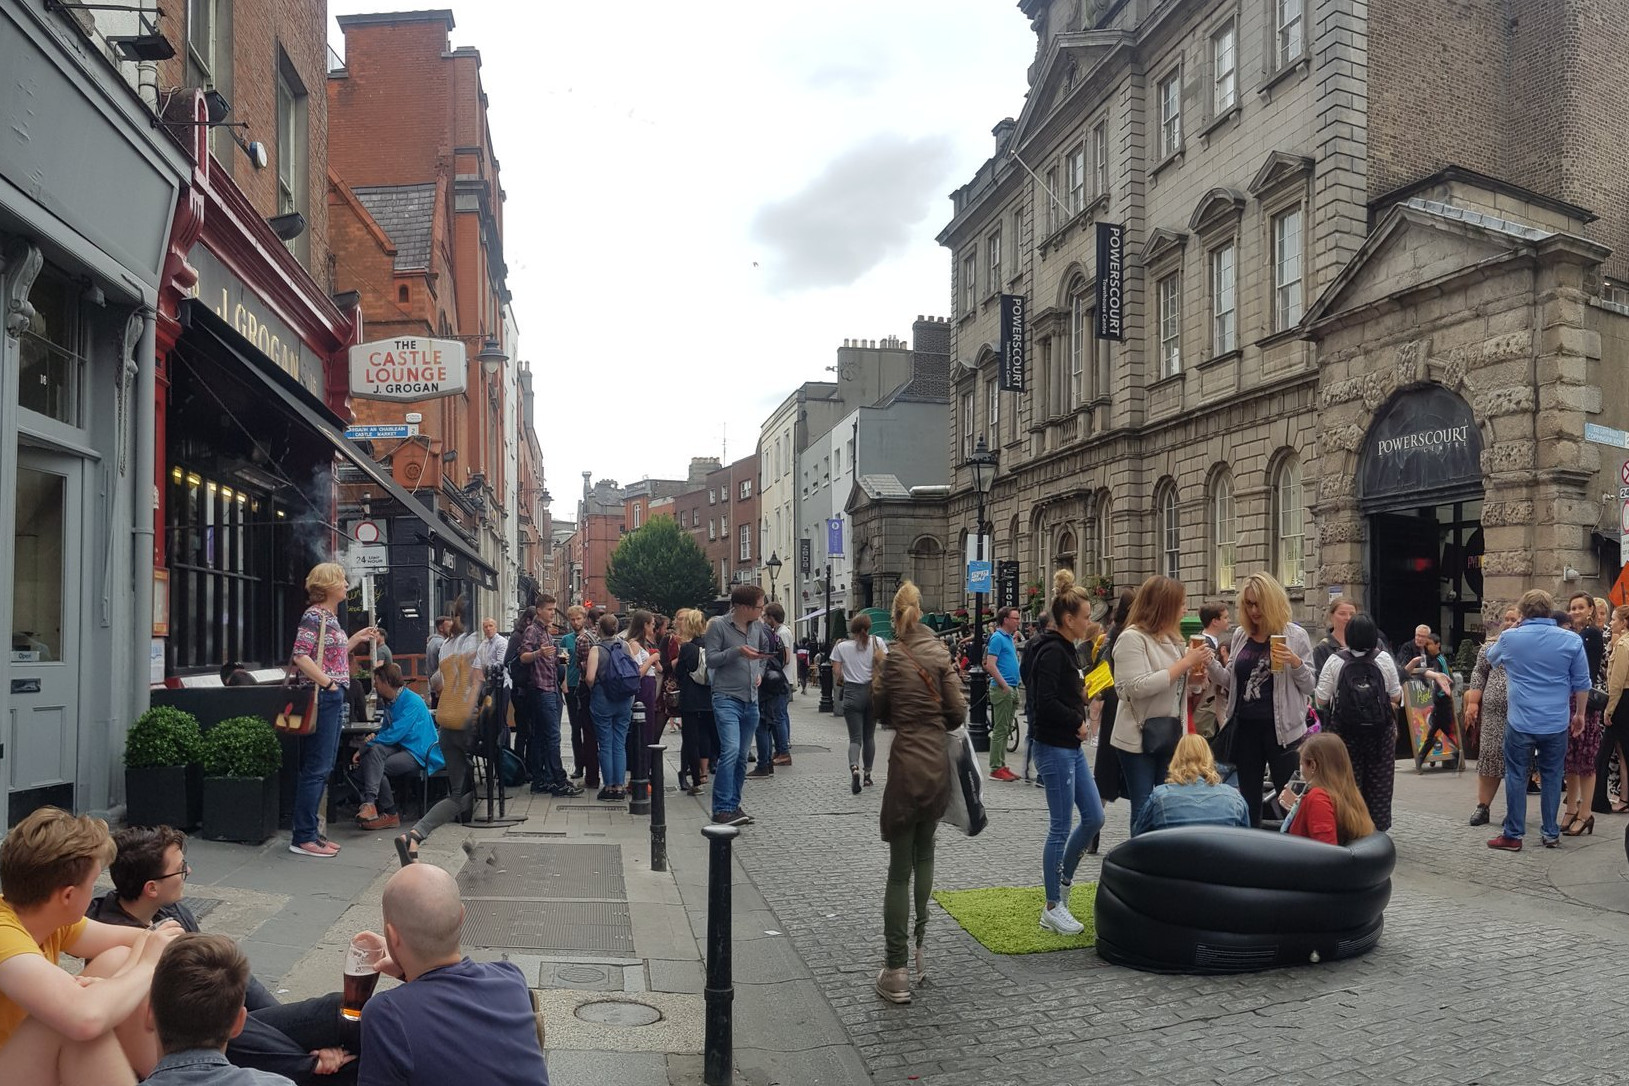 Plans for pedestrian space disappointing and insufficient